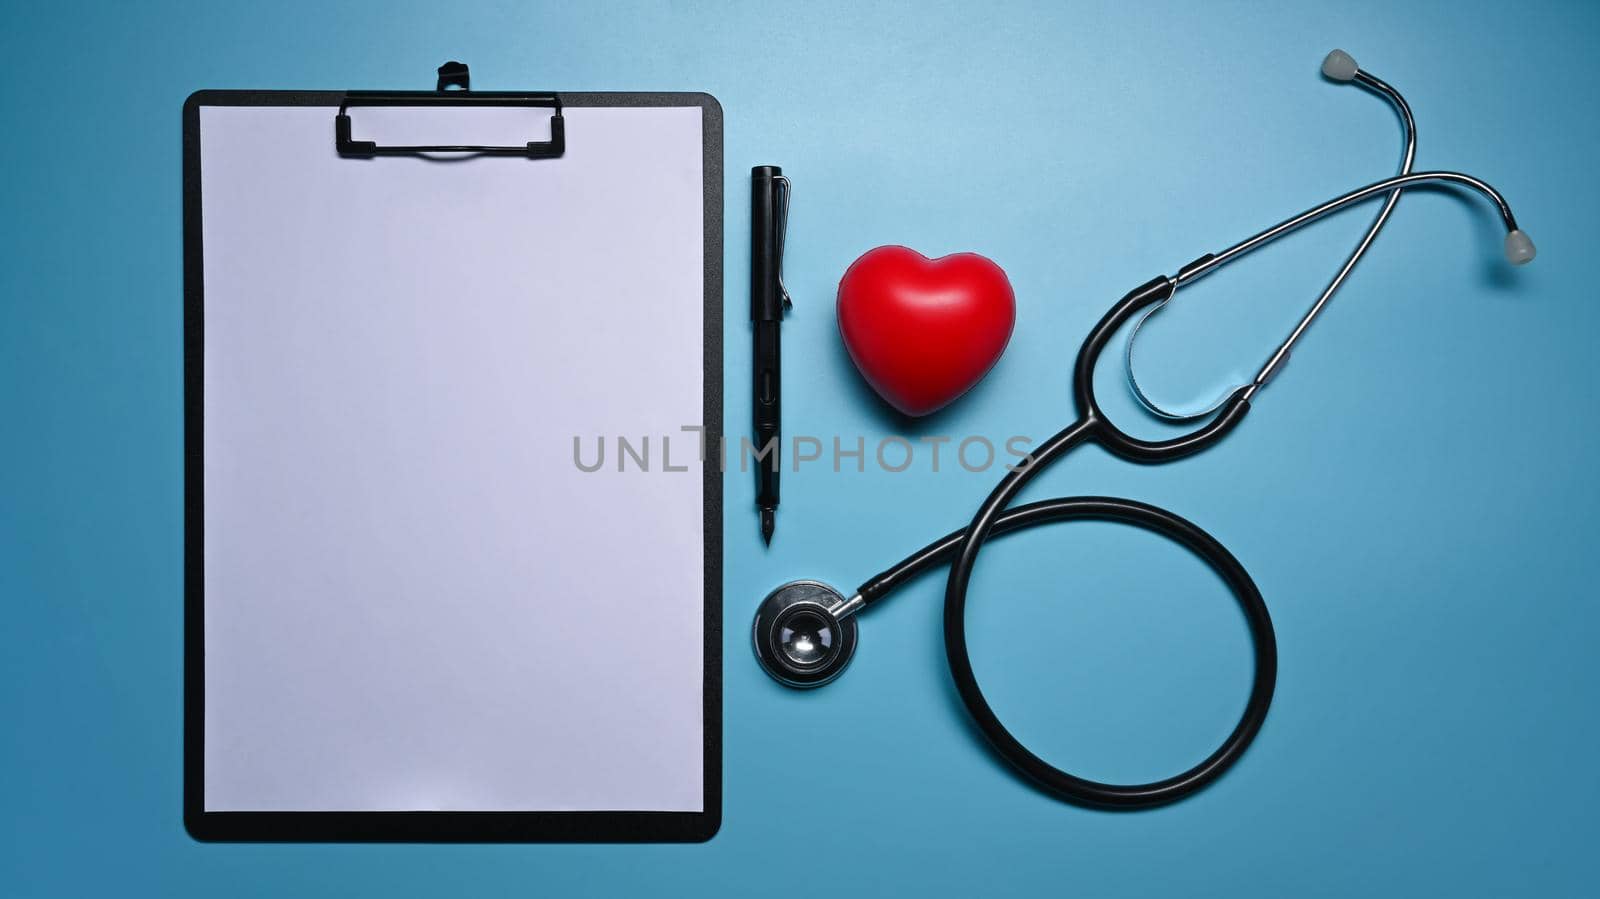 Clipboard, stethoscope and red heart on blue background. Healthcare and medical concept. by prathanchorruangsak